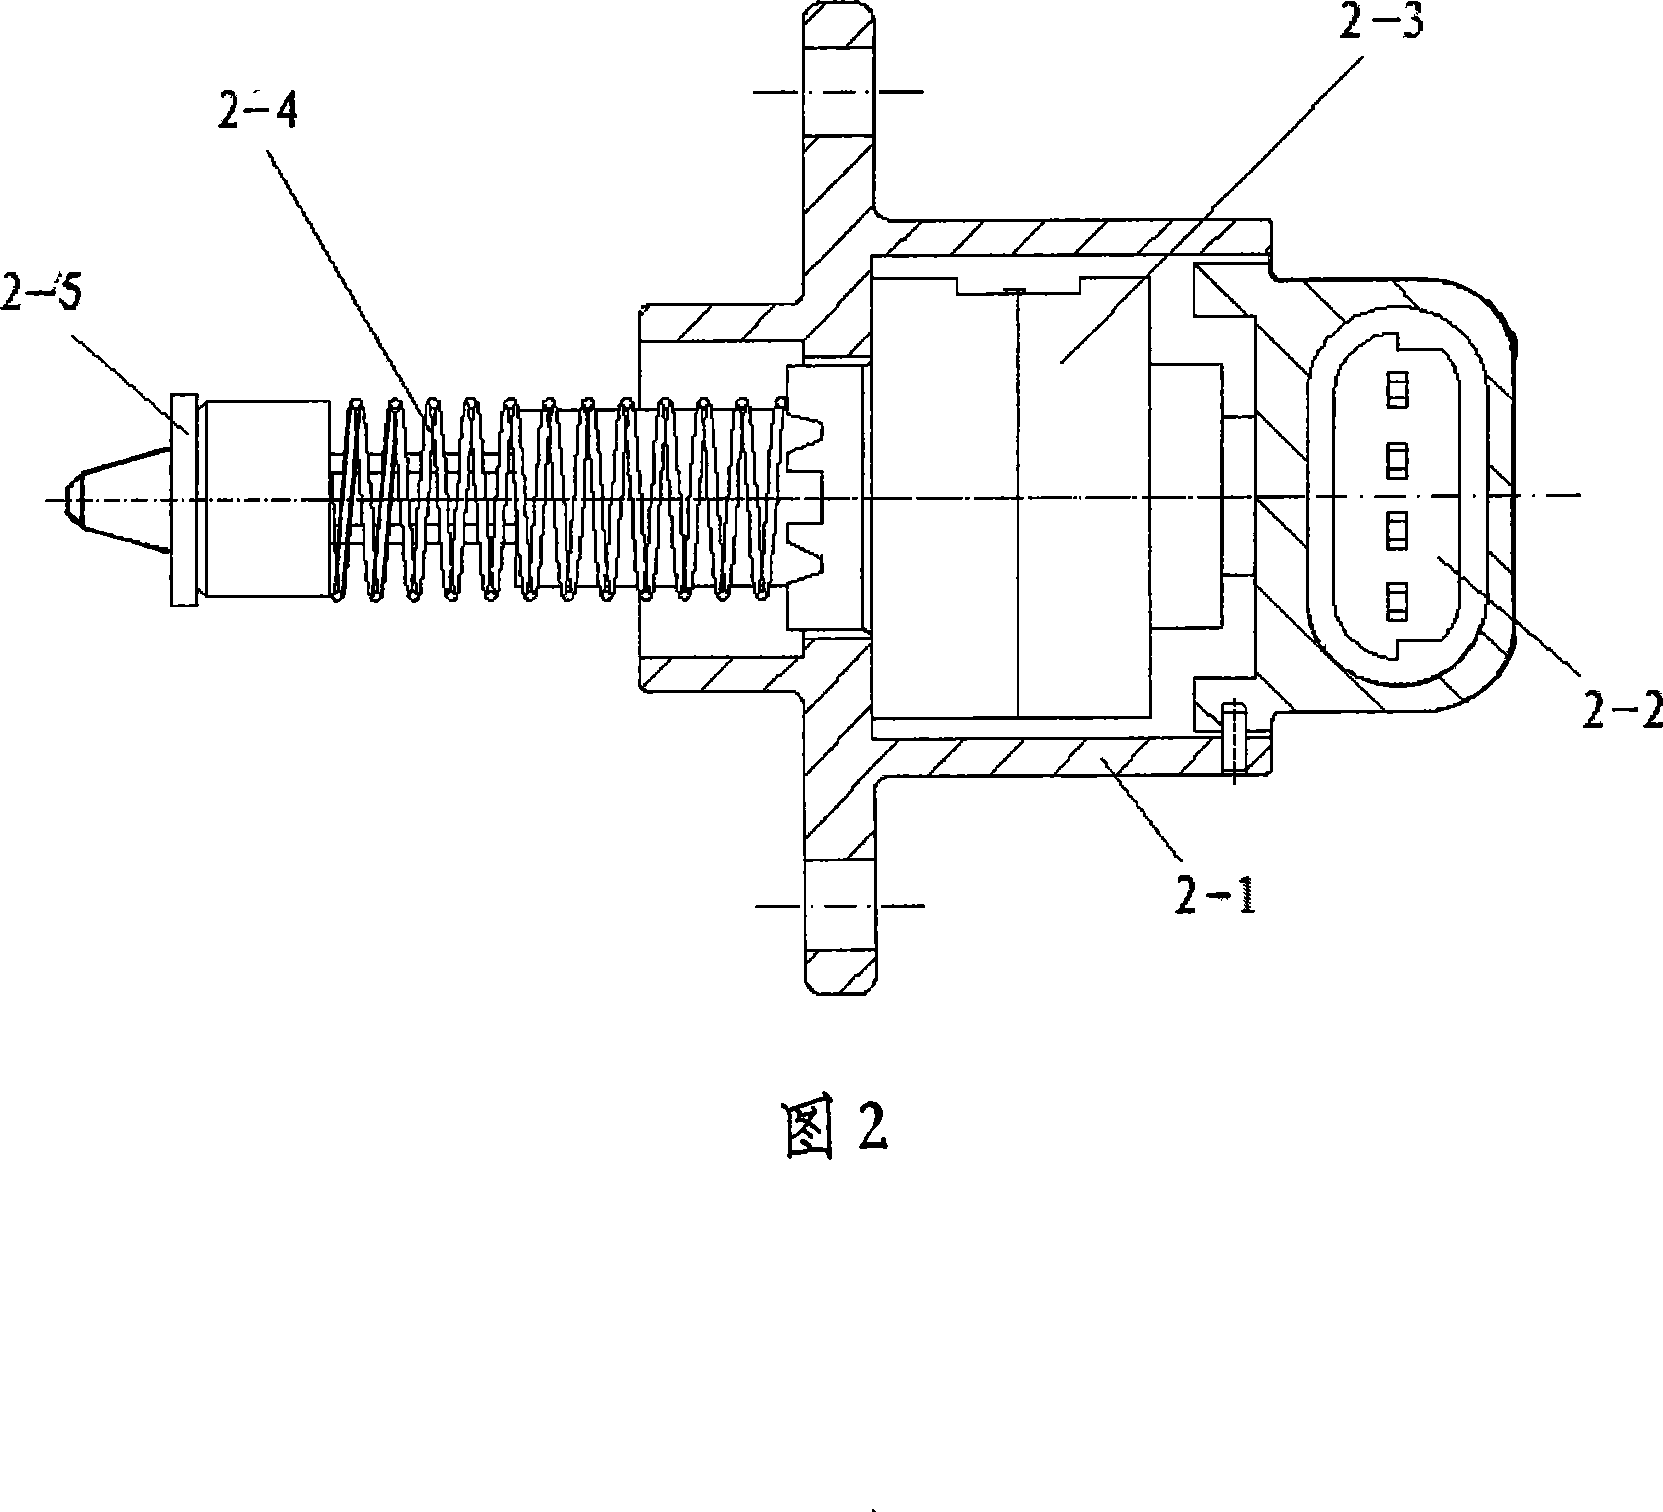 Motor engine electric control fuel oil spraying system